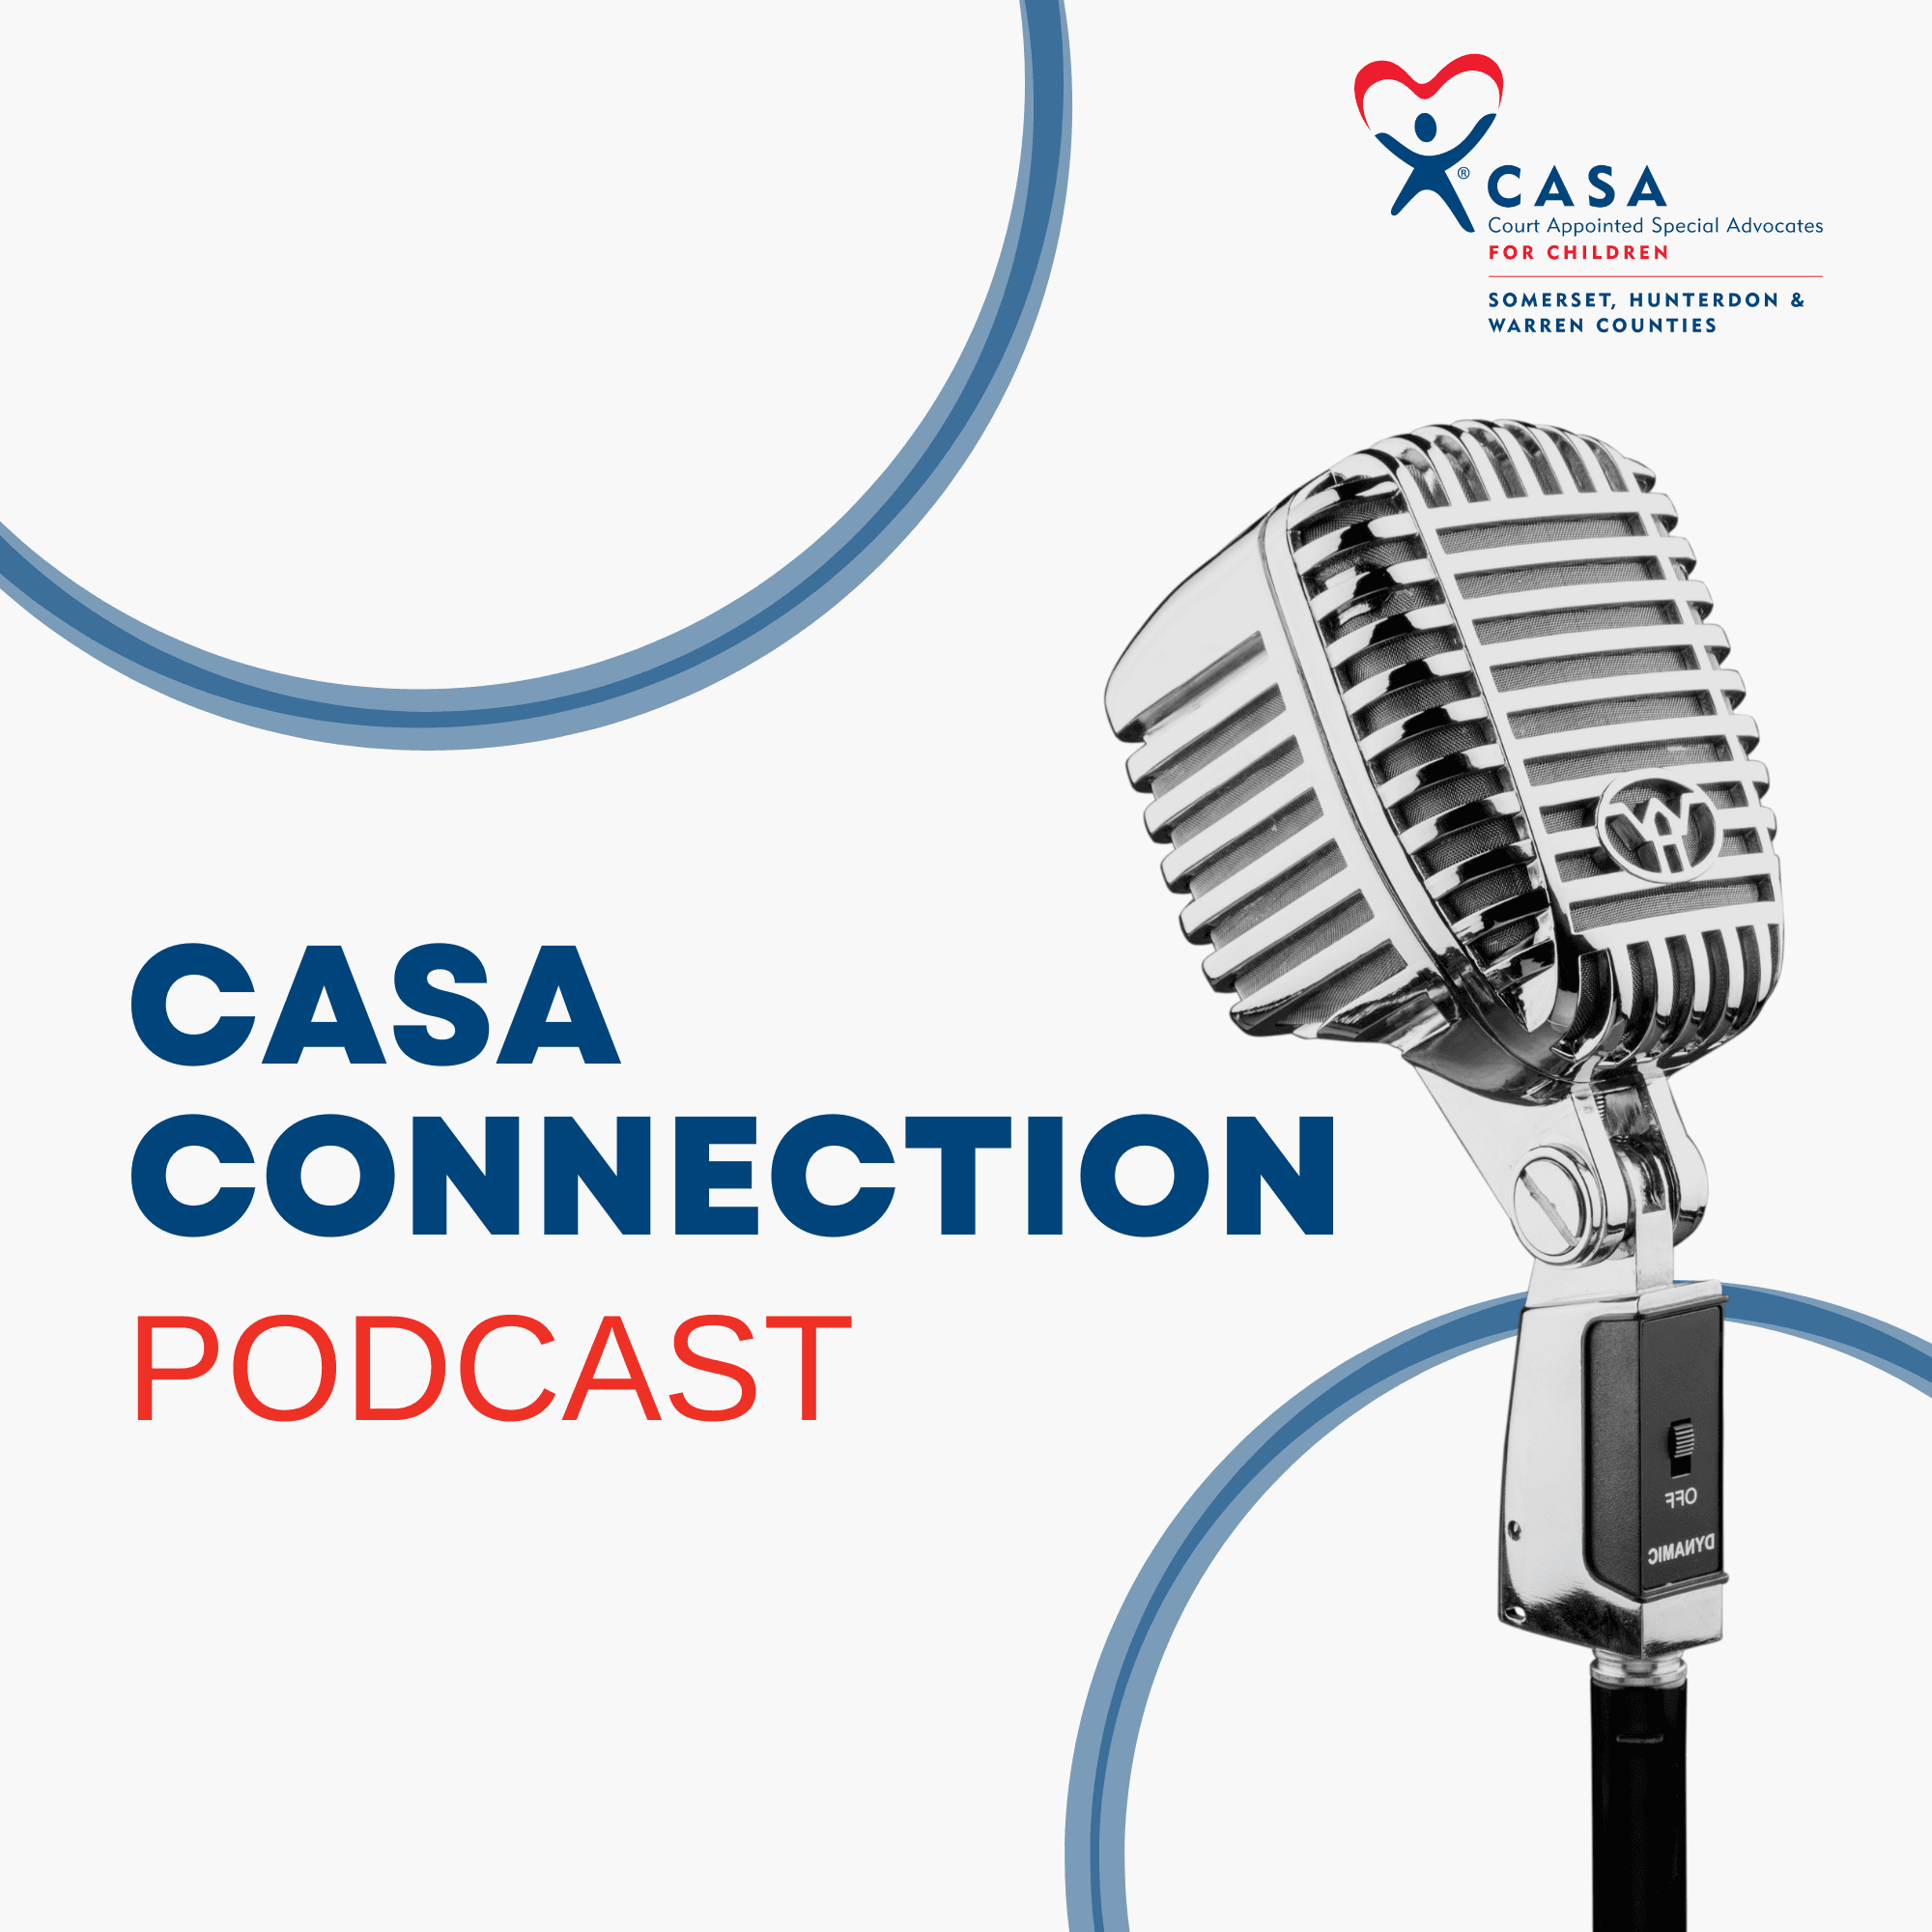 The CASA Connection Podcast